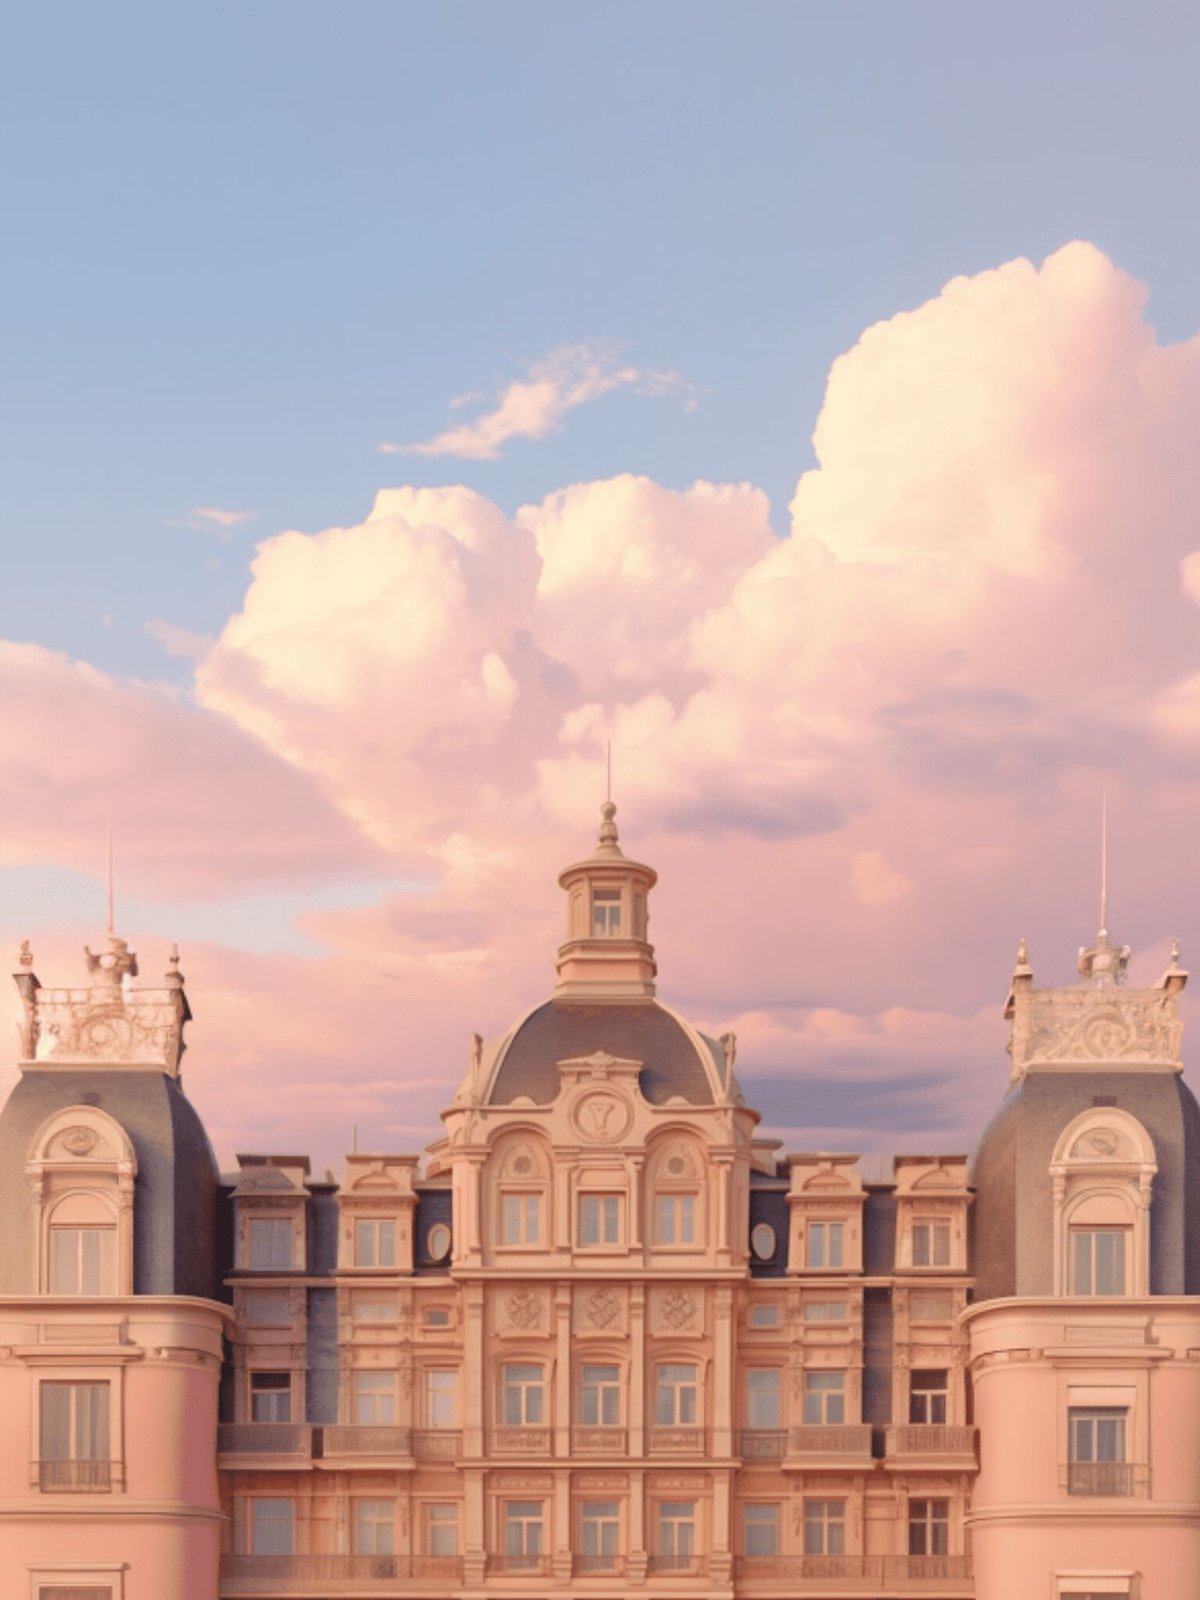 european architecture and pink sky